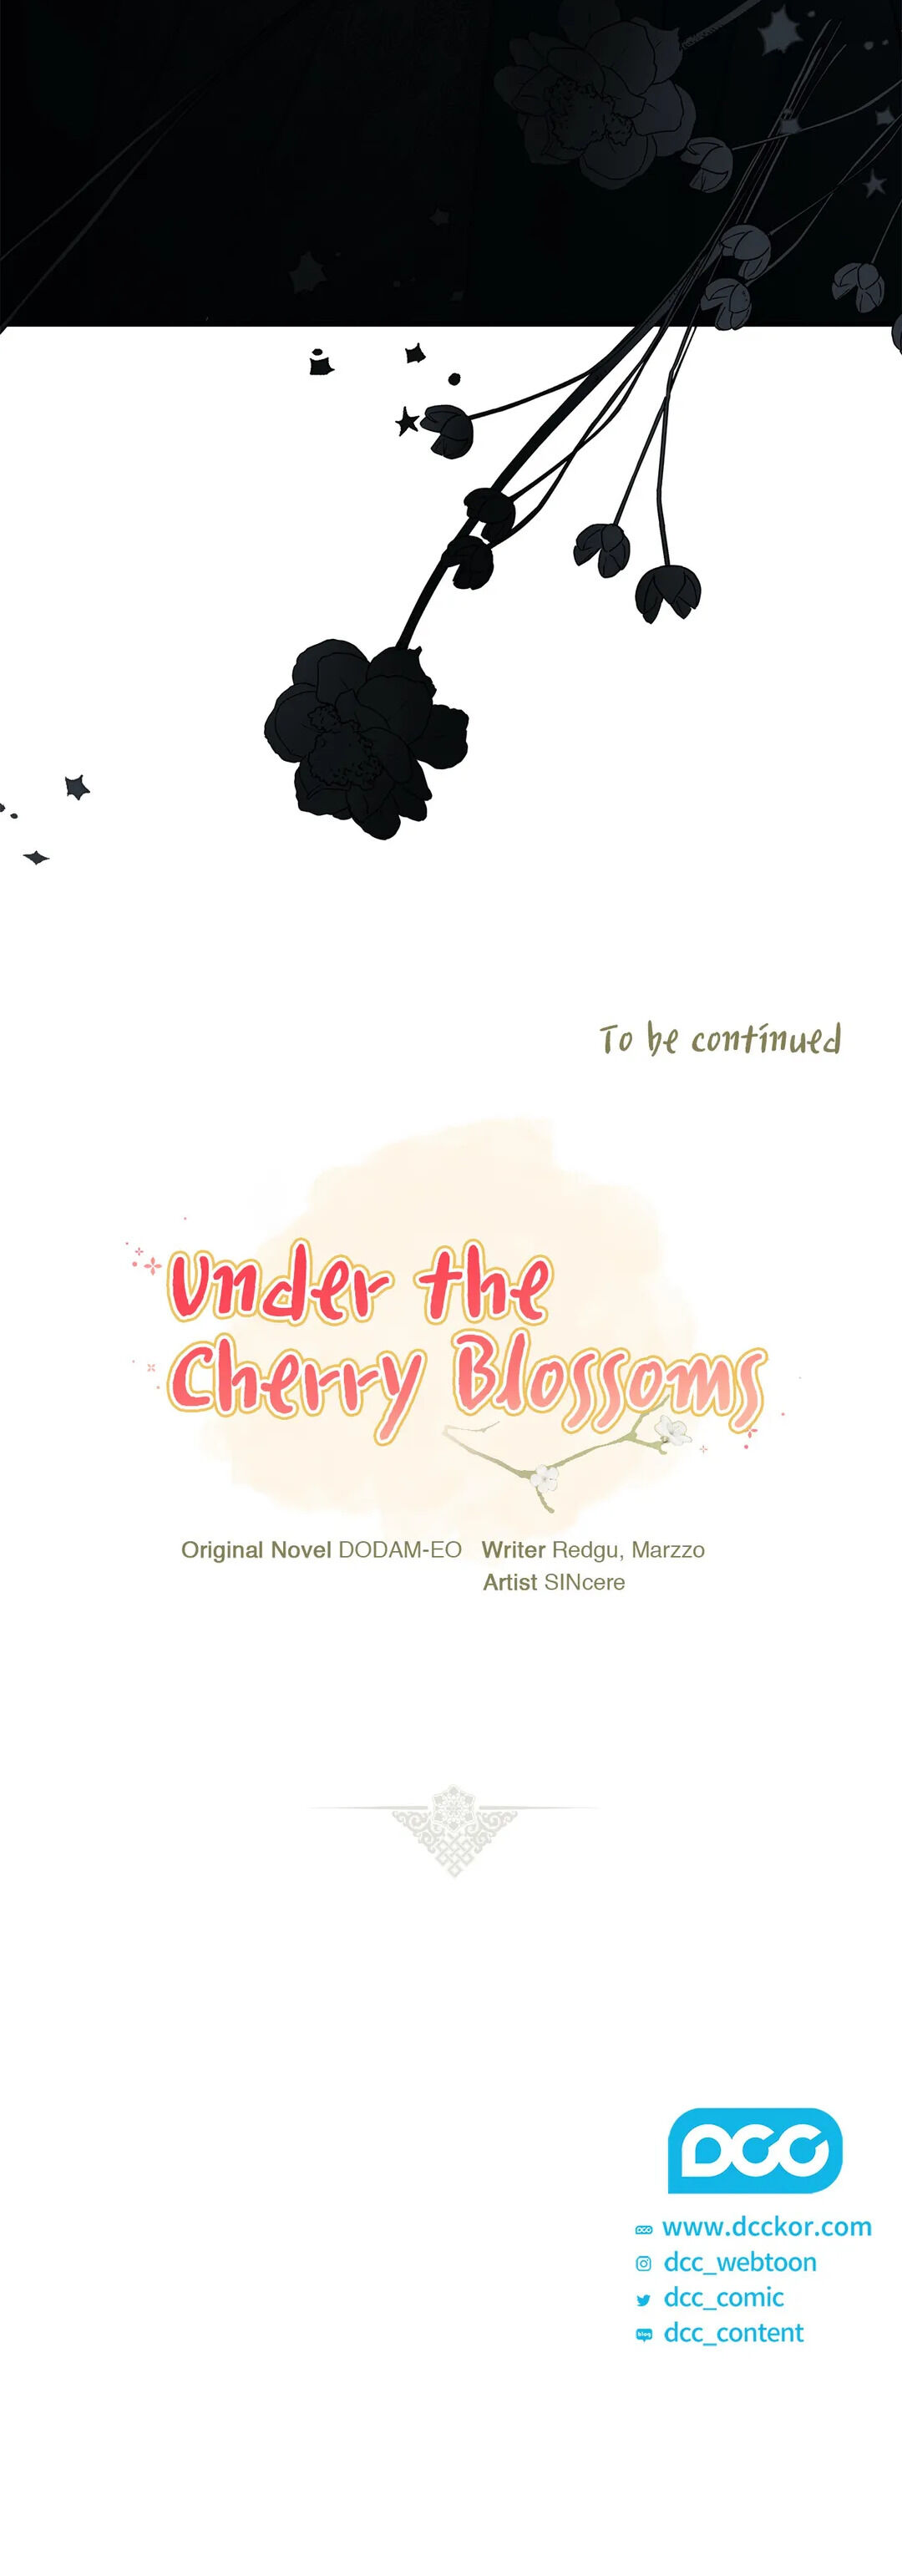 Under the Cherry Blossoms image